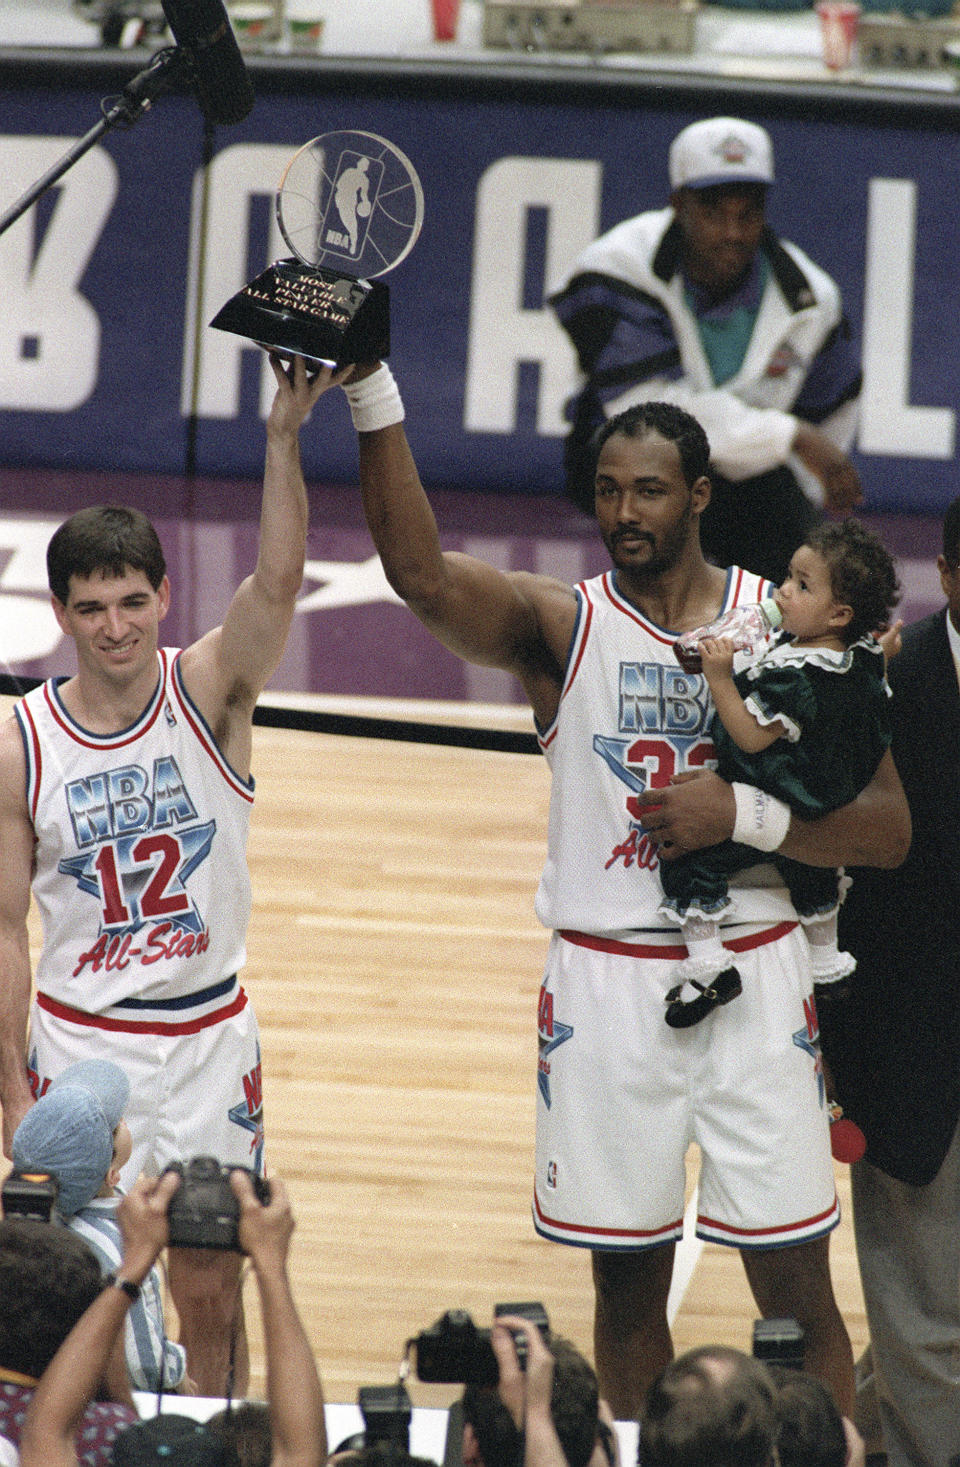 FILE - Utah Jazz teammates and co-Most Valuable Player winners John Stockton, left, and Karl Malone hold up the All-Star MVP trophy after playing for the West team, which won the 43rd NBA All-Star game 135-130 in Salt Lake City, on Feb. 21, 1993. Malone holds his daughter, Kaydee. Salt Lake City's hosting of this weekend's NBA All-Star game for the first time in three decades gives Utah another opportunity to reshape a long-held belief that the state is odd or peculiar — a years-long push that Jazz owner Ryan Smith and many other influential state leaders have prioritized. (AP Photo/Roberto Borea, File)